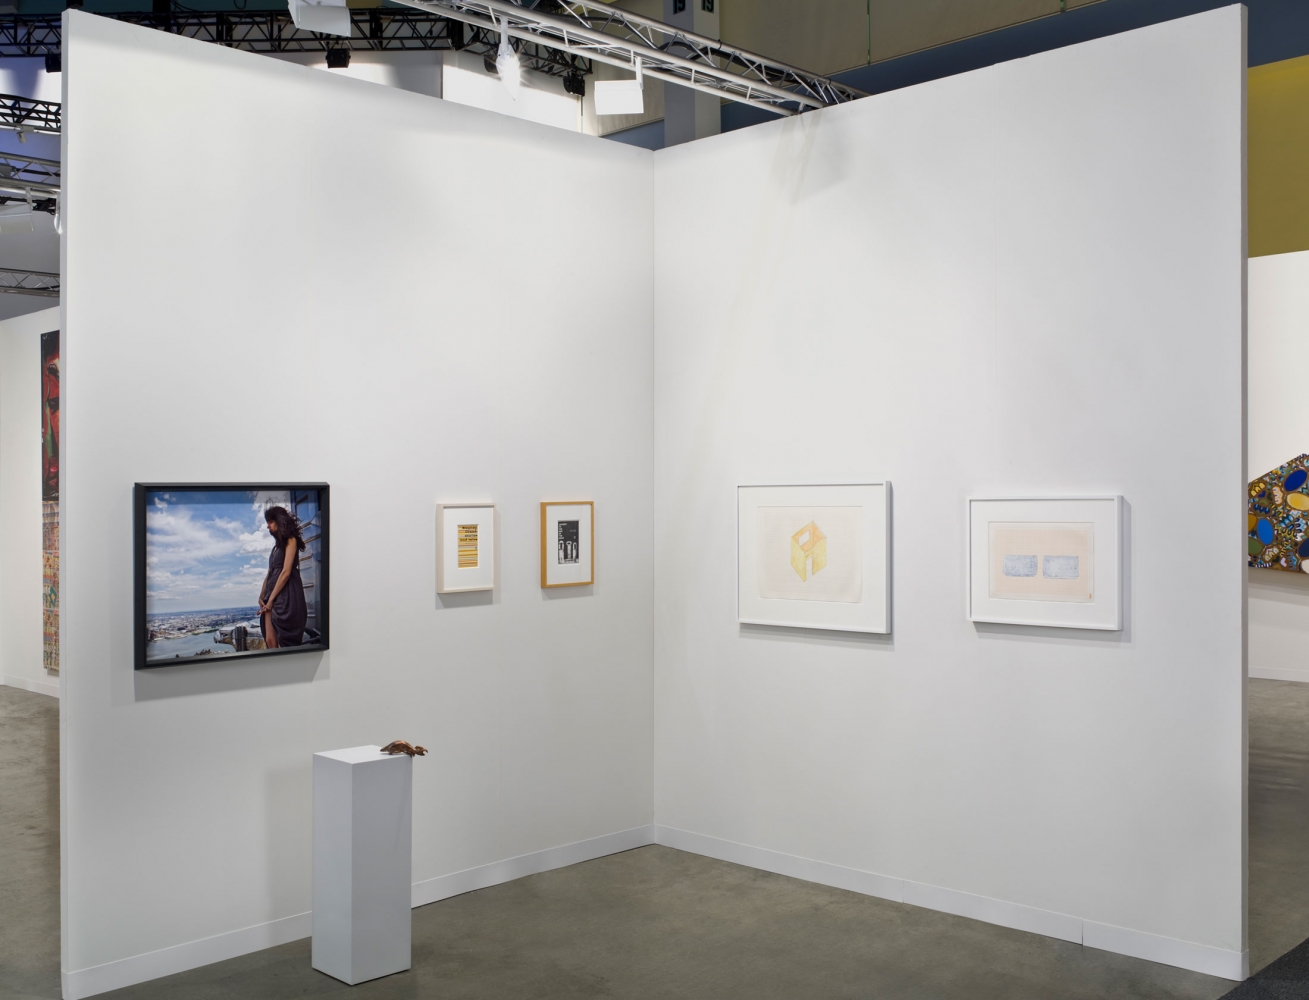 Luhring Augustine
Art Basel Miami Beach
Installation view
2010